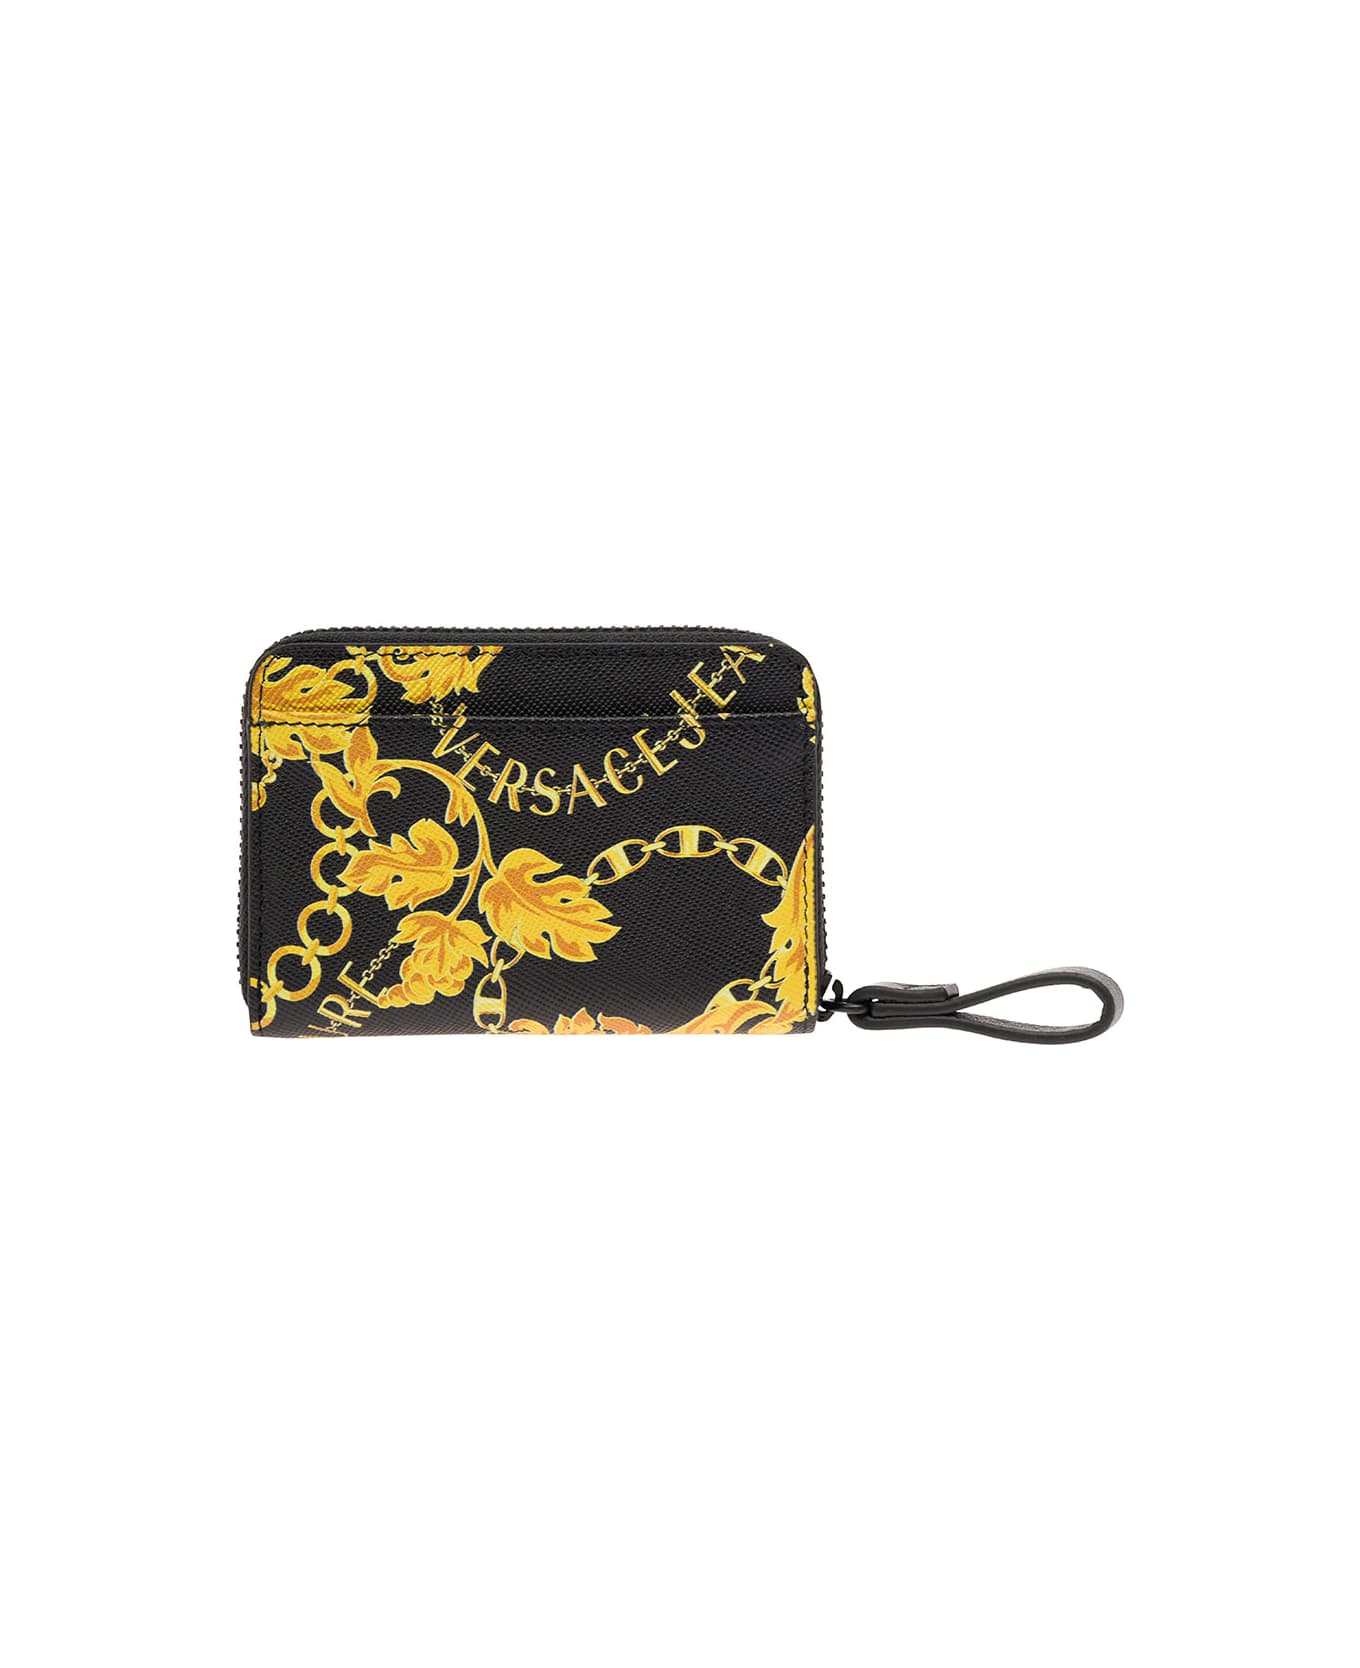 Versace Jeans Couture Black Zip-around Wallet With Barocco Print In Leather Man - Black